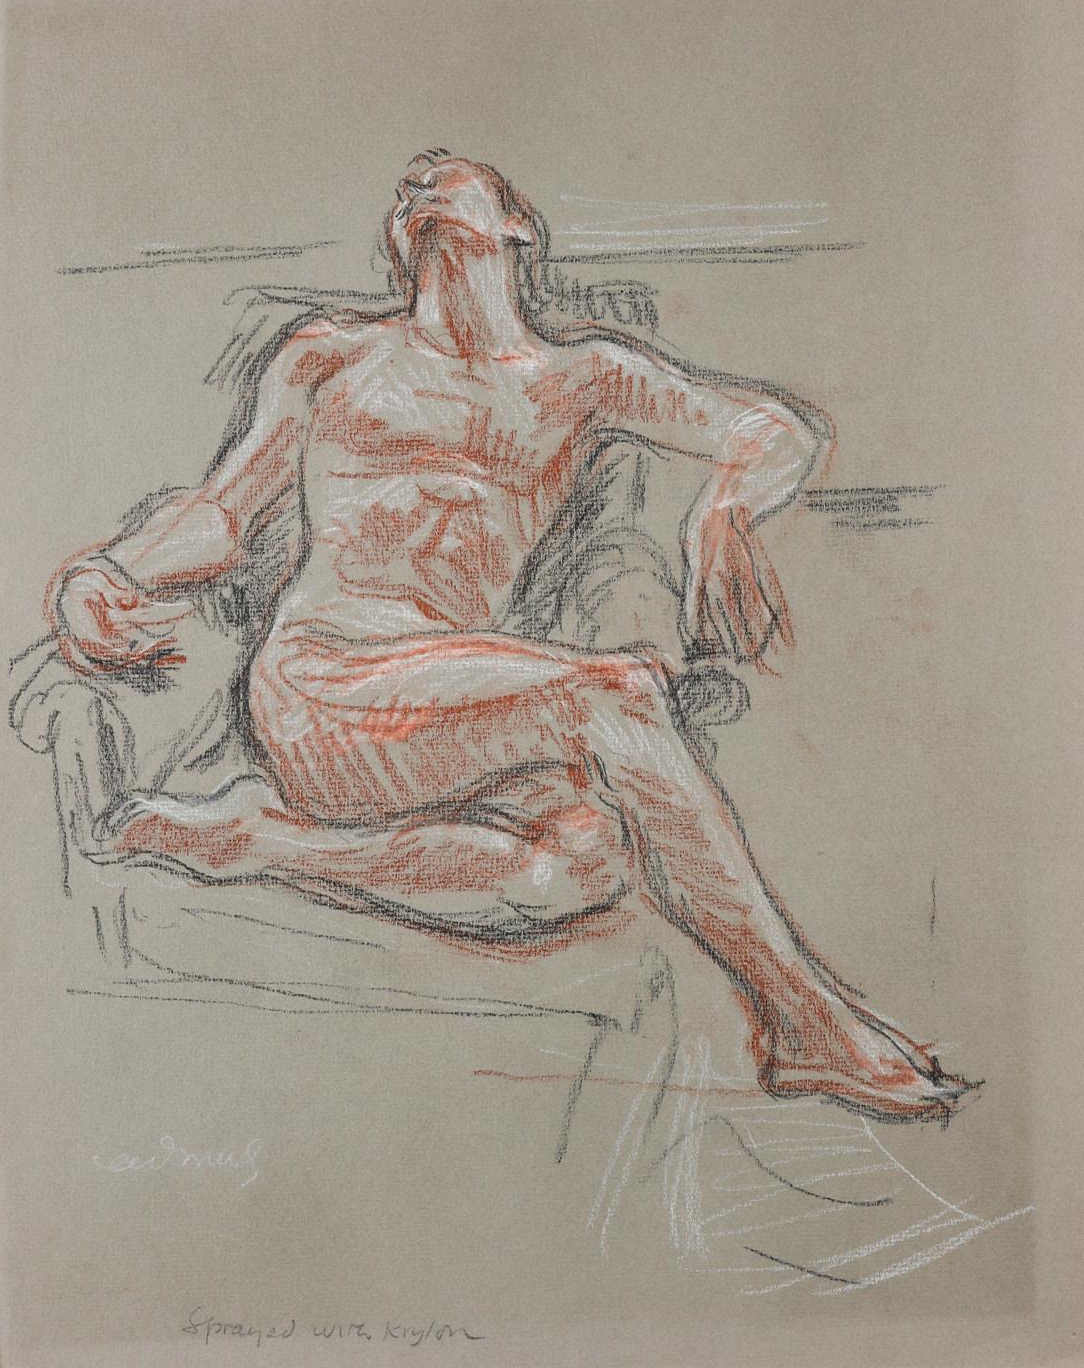 &quot;Study for &#39;Male Nude NM32&#39;&quot;, 1967
Crayon on paper
15 1/2 x 12 1/2 inches
39.5 x 32 cm
CADZ 40